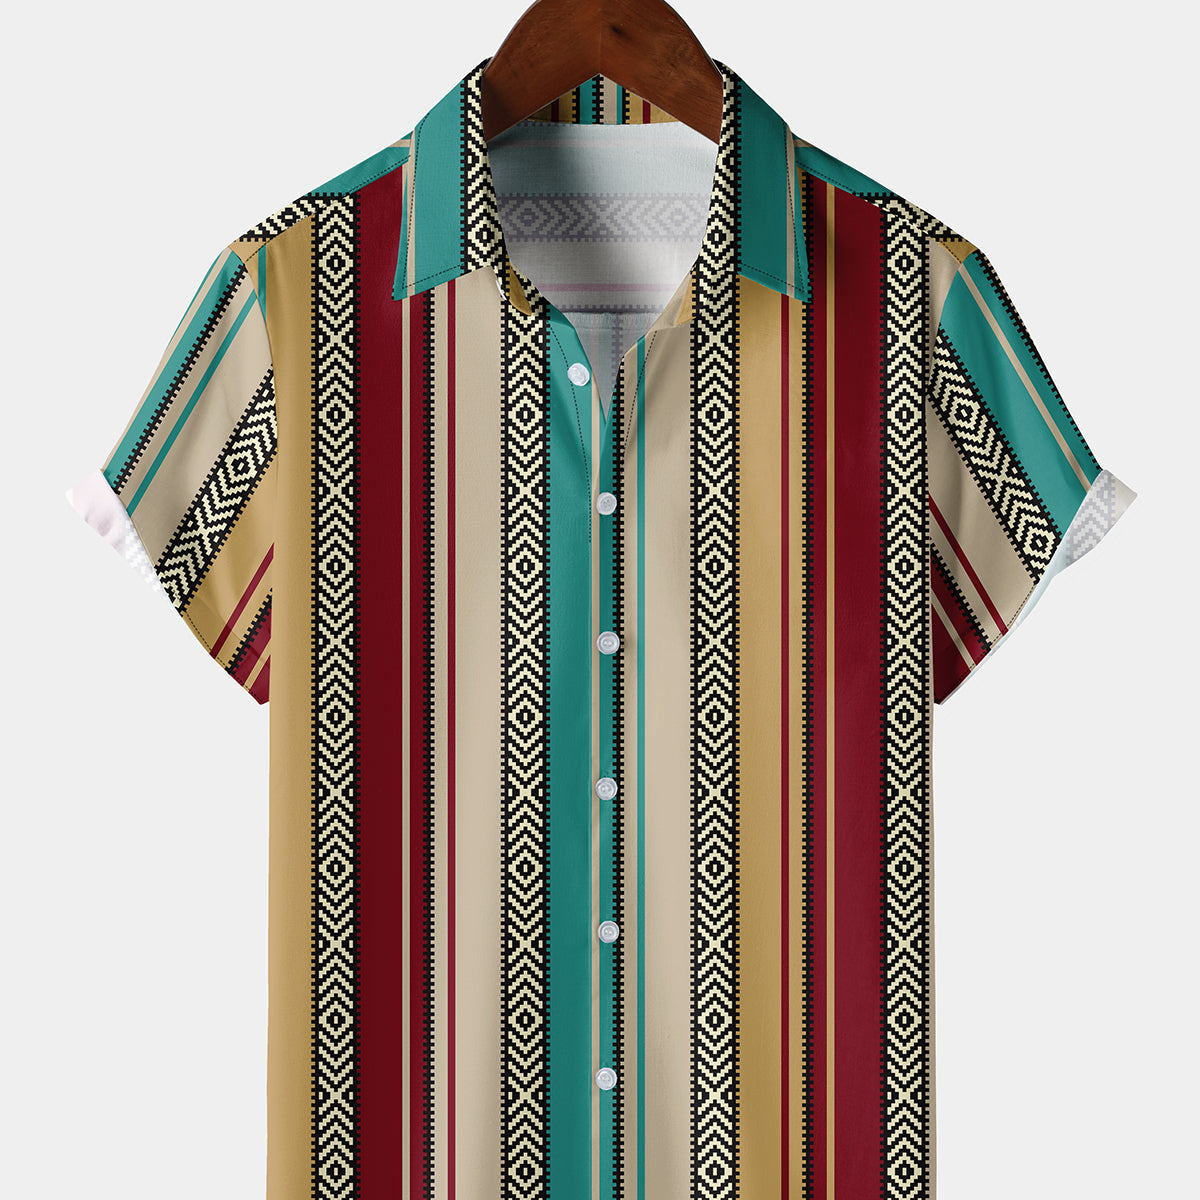 Men's Retro Striped Casual Button Up Ethnic Short Sleeve Shirt